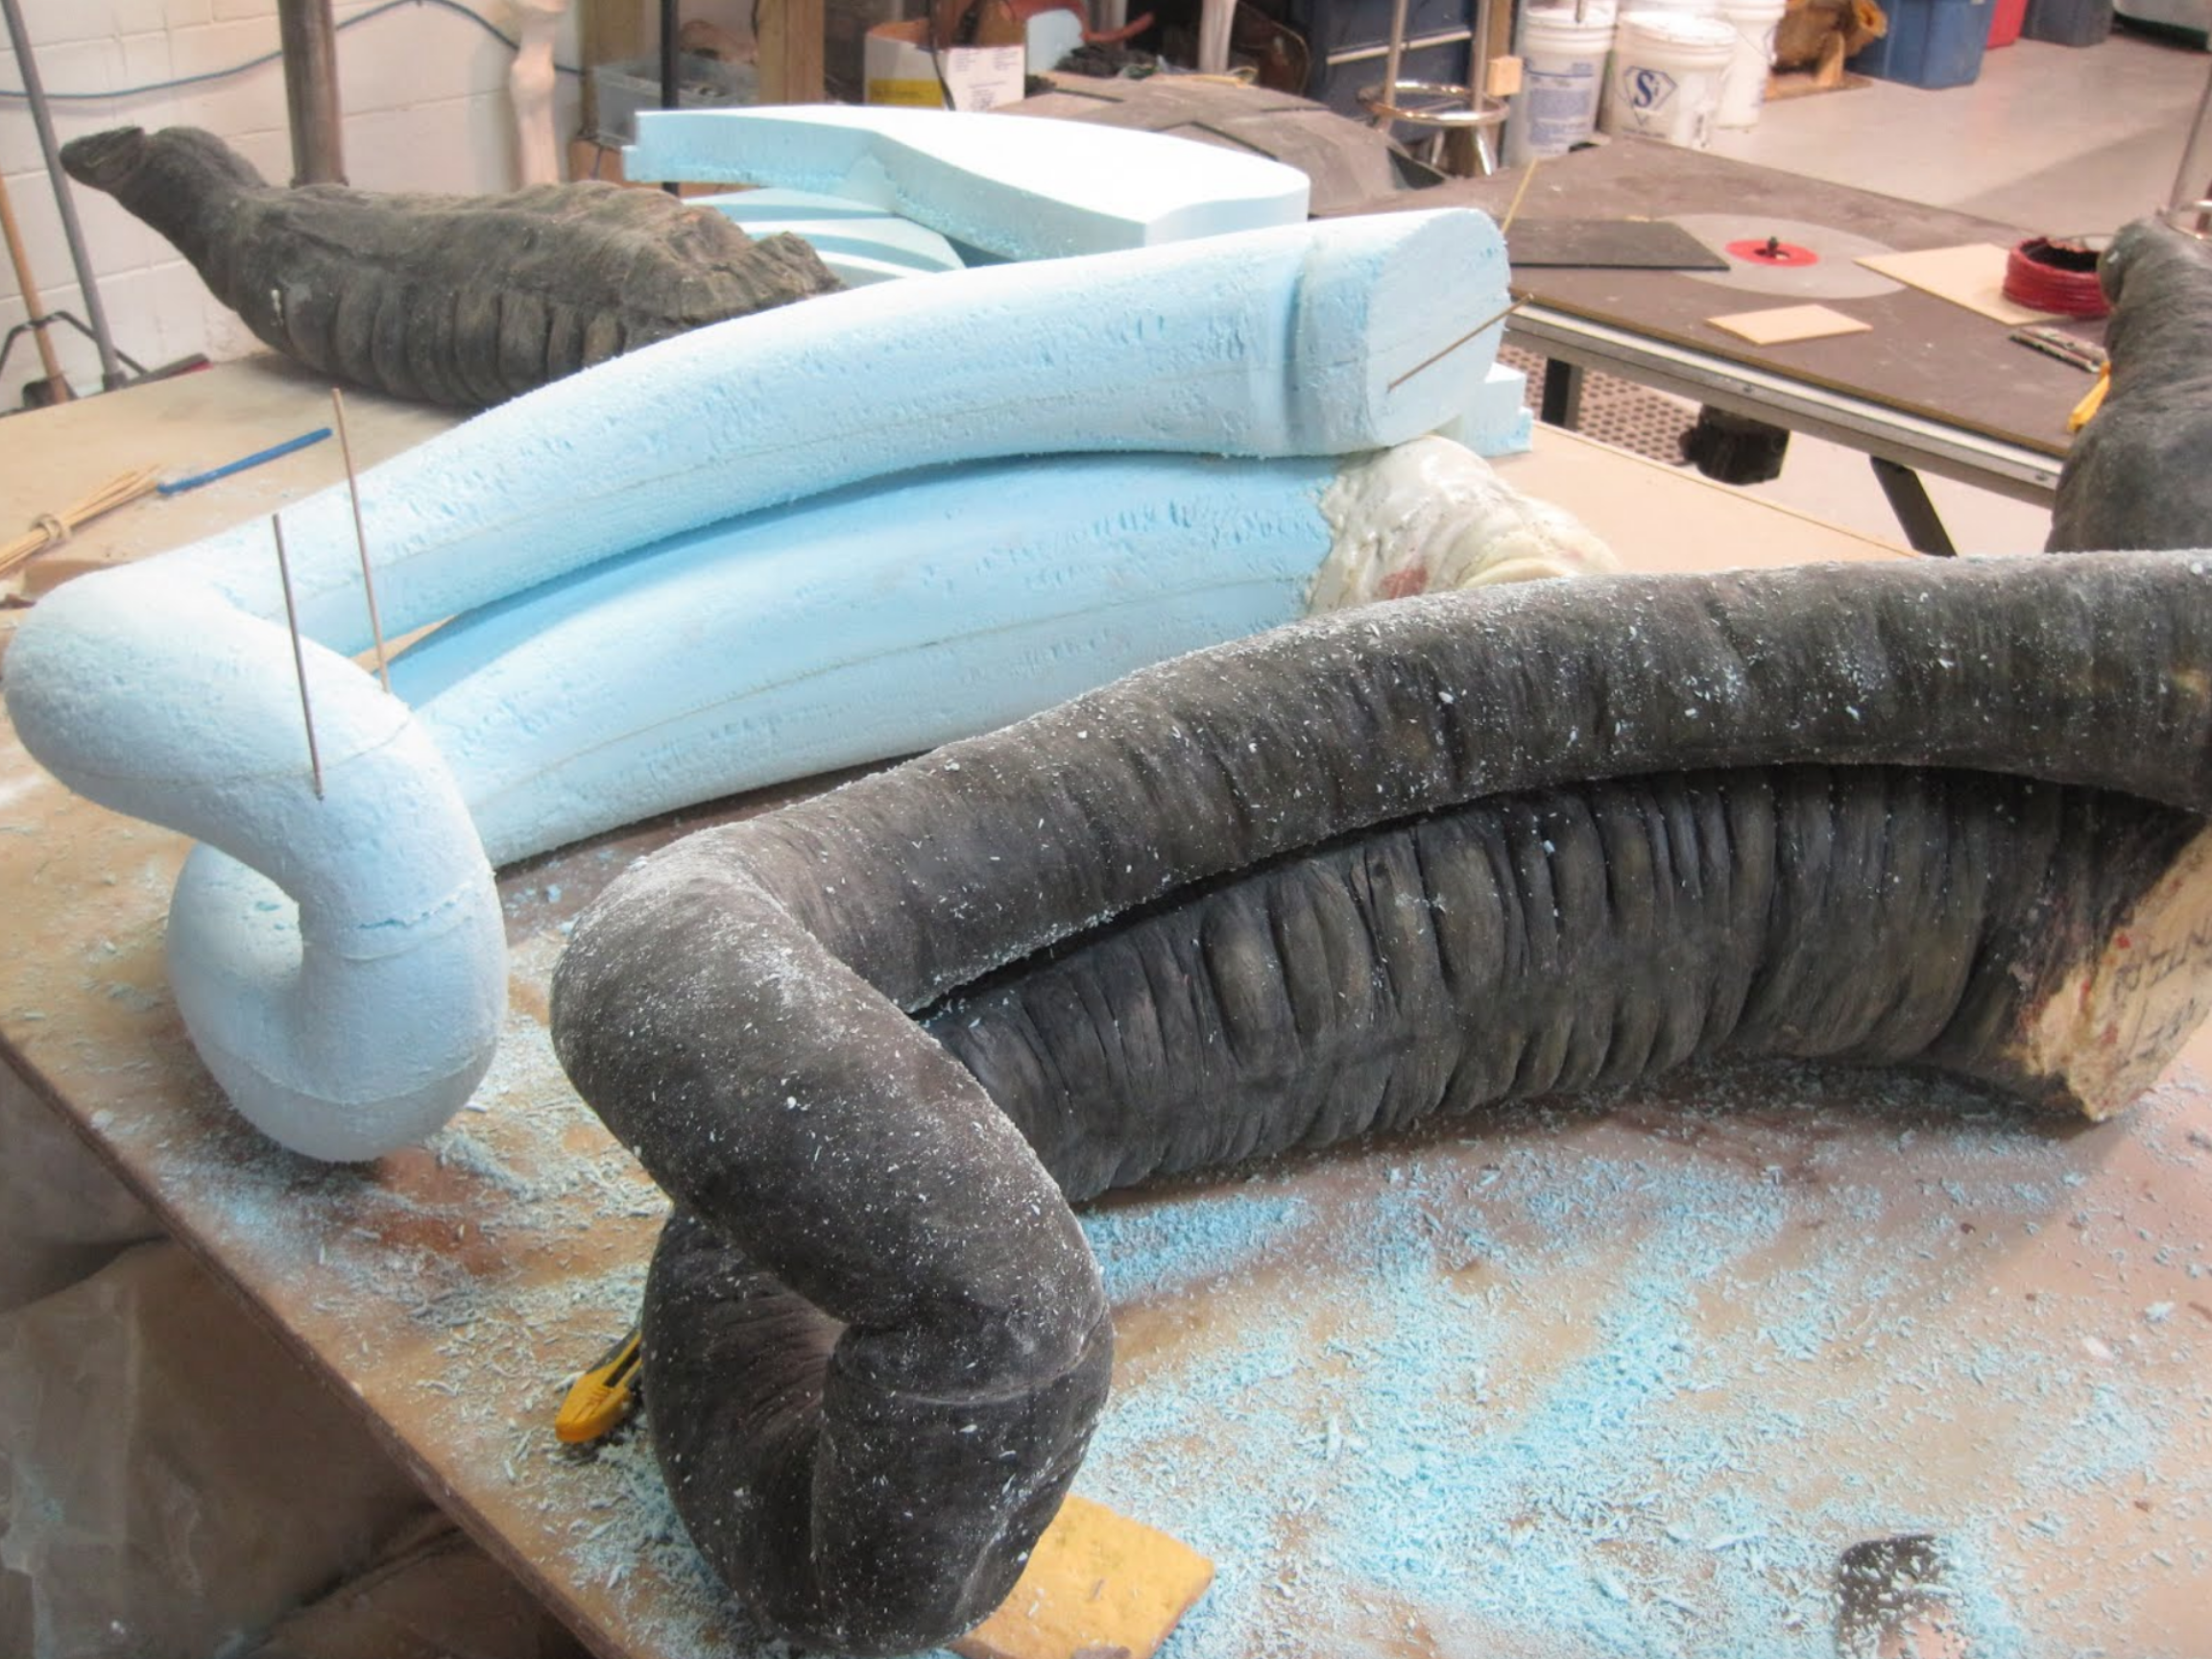  We are now beginning the refinement process for the equine colon. Reproductions of the various equine colon sections are being sculpted in styrofoam in order to improve the surface texture of the models, as well as their durability, when compared wi